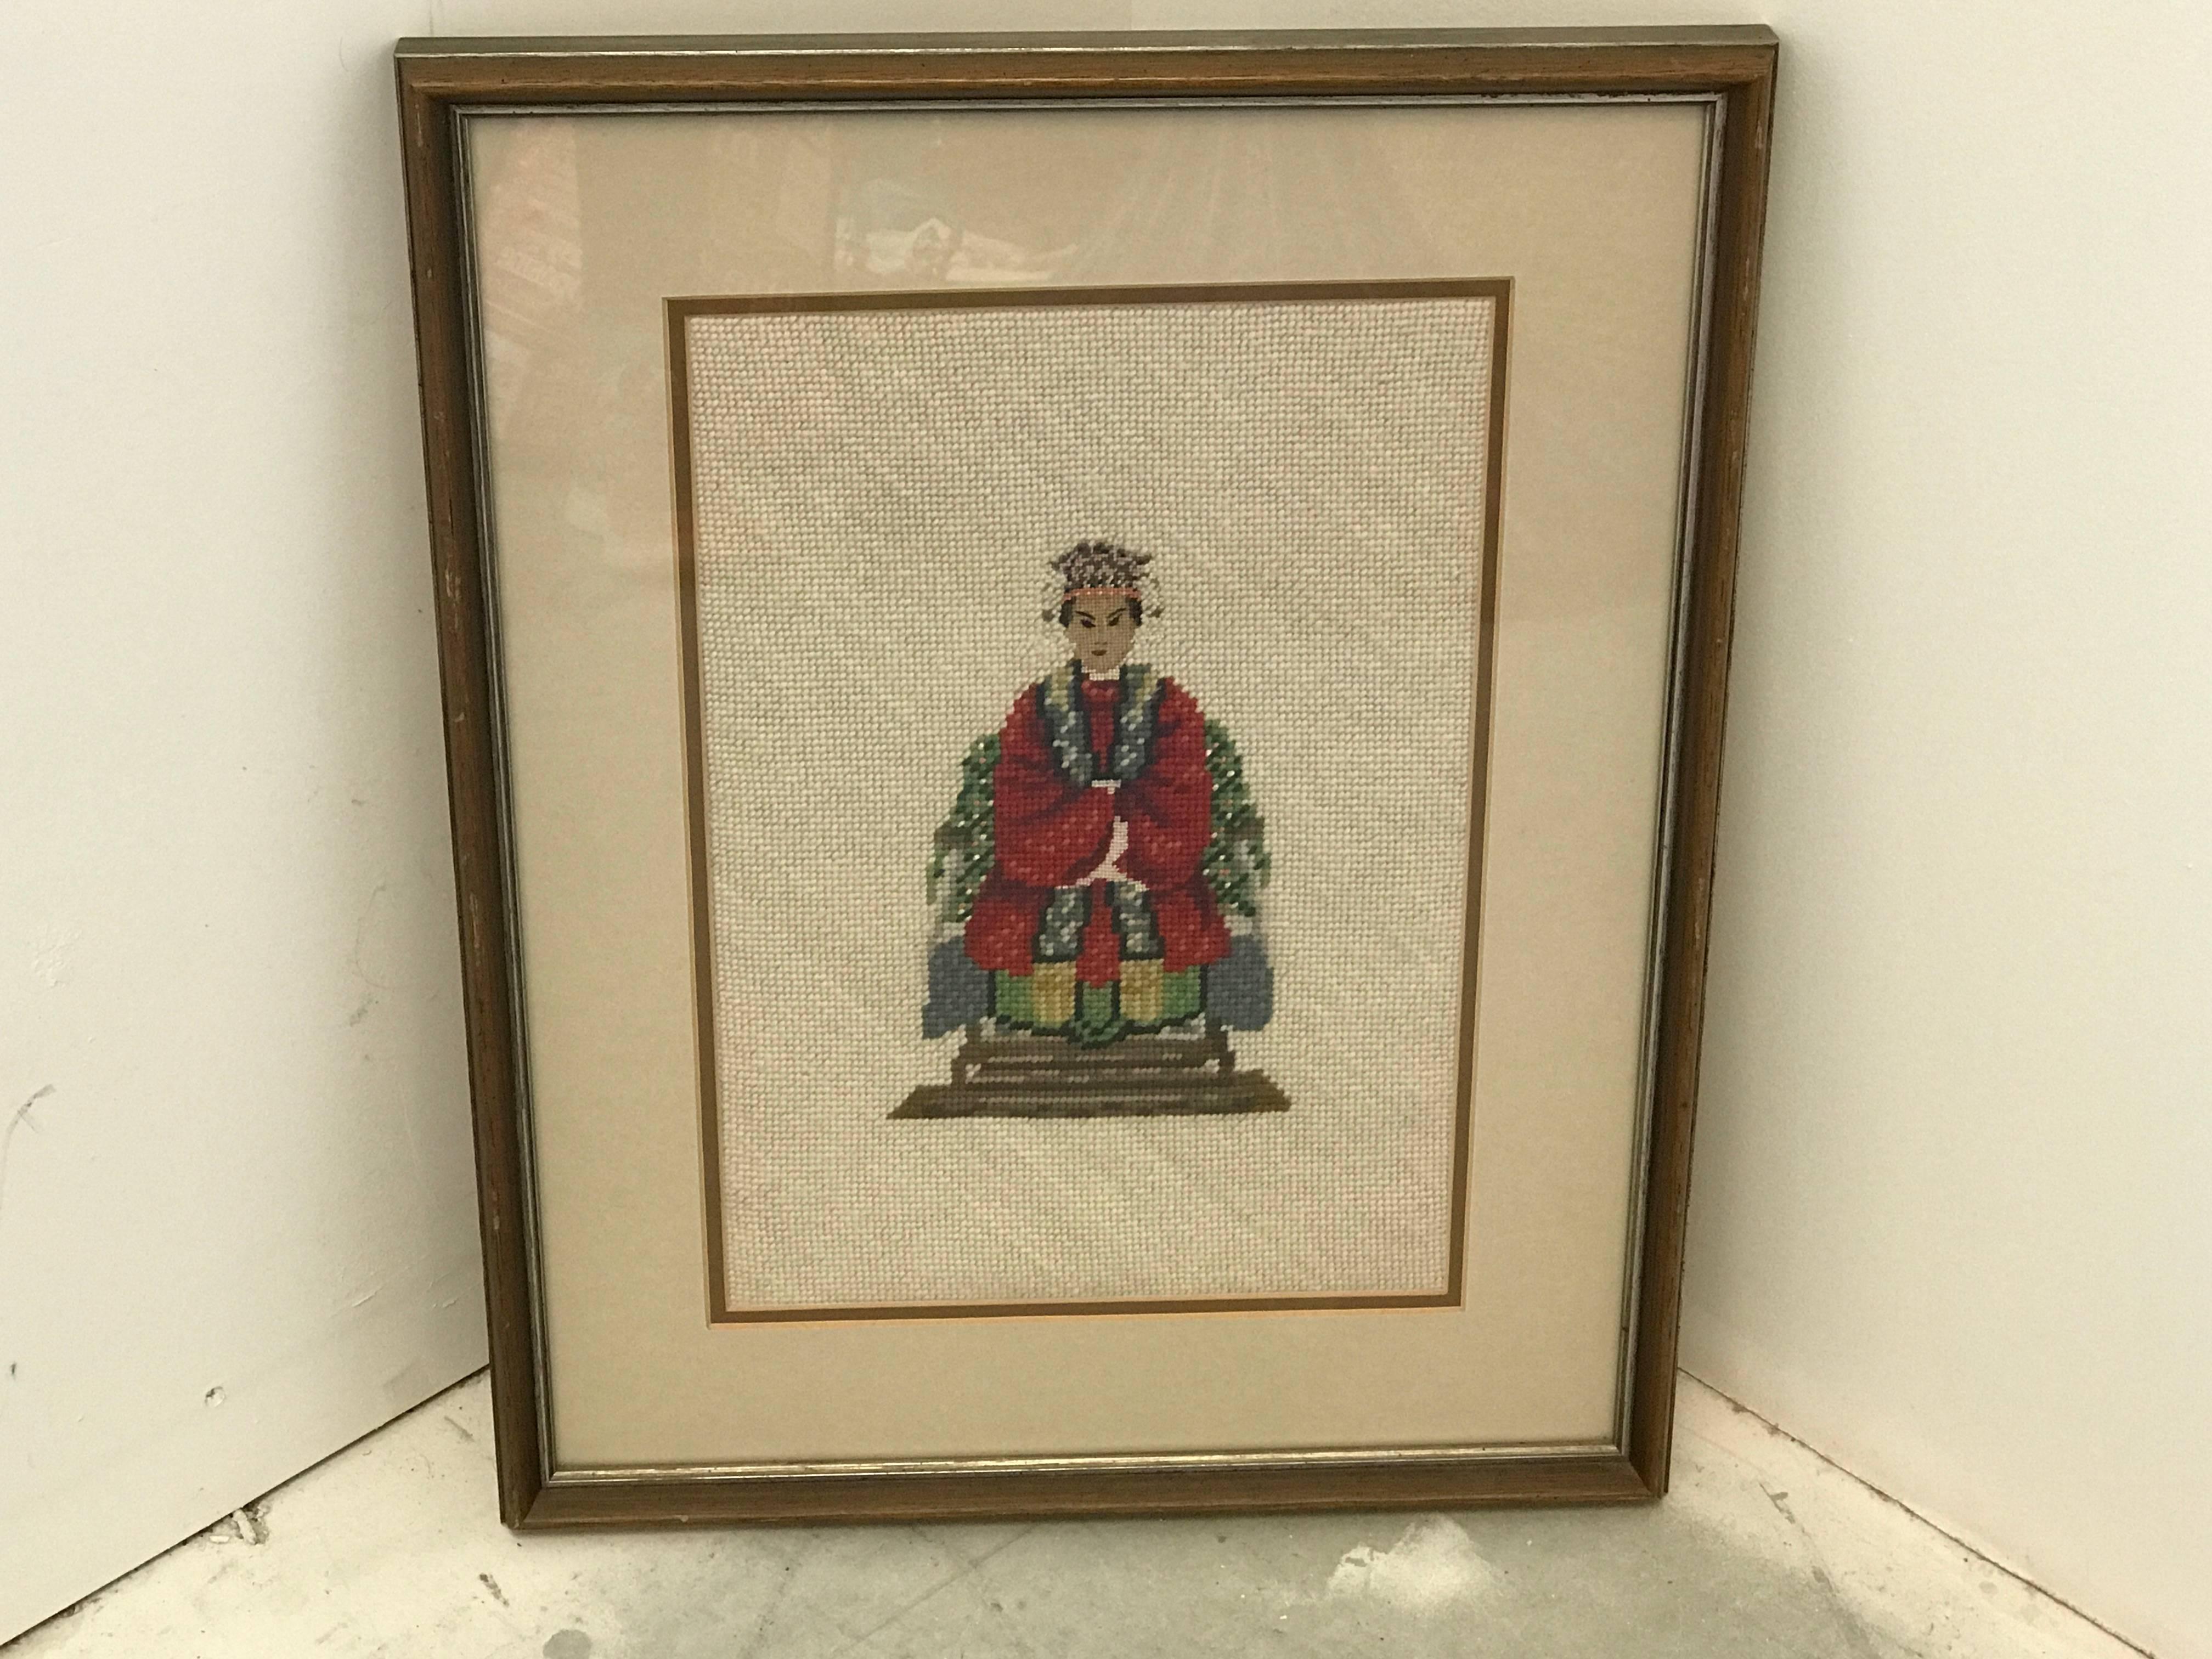 Offered is a beautiful, 1960s Asian empress needlepoint. Framed.